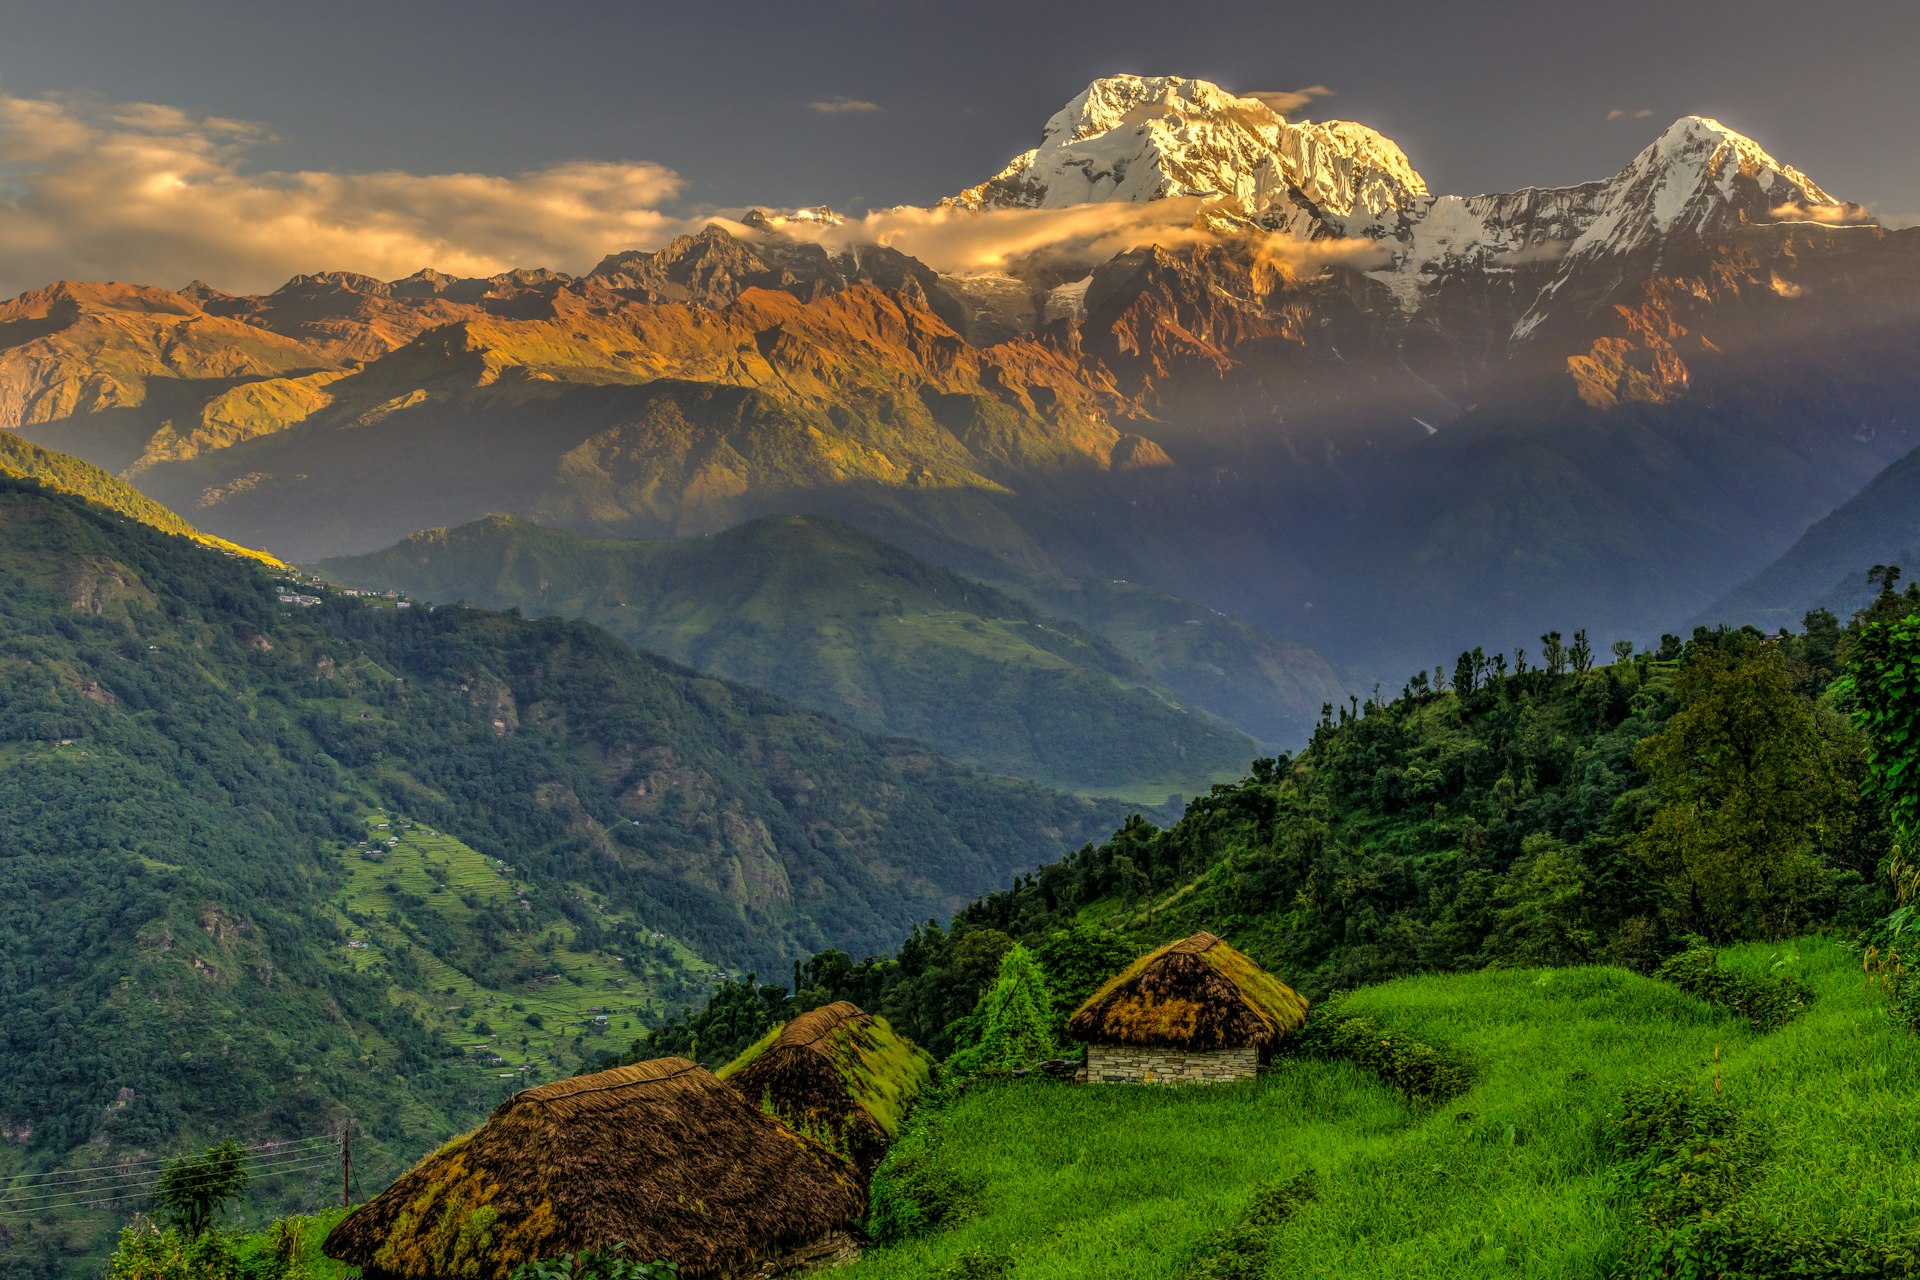 Annapurna South view from Tolka village at sunrise, Nepal